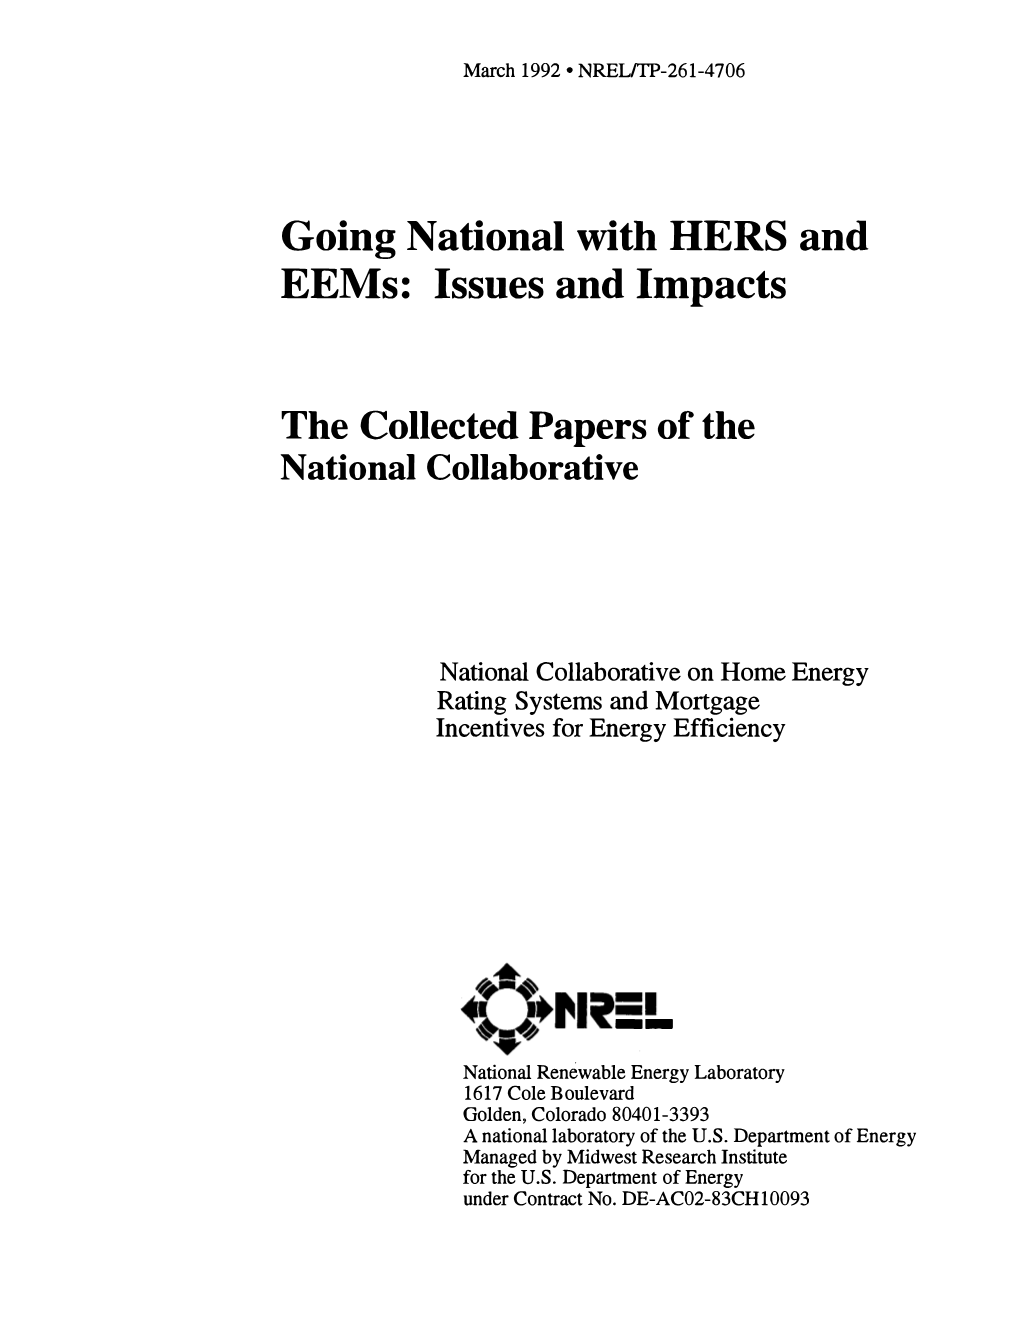 Going National with HERS and Eems: Issues and Impacts